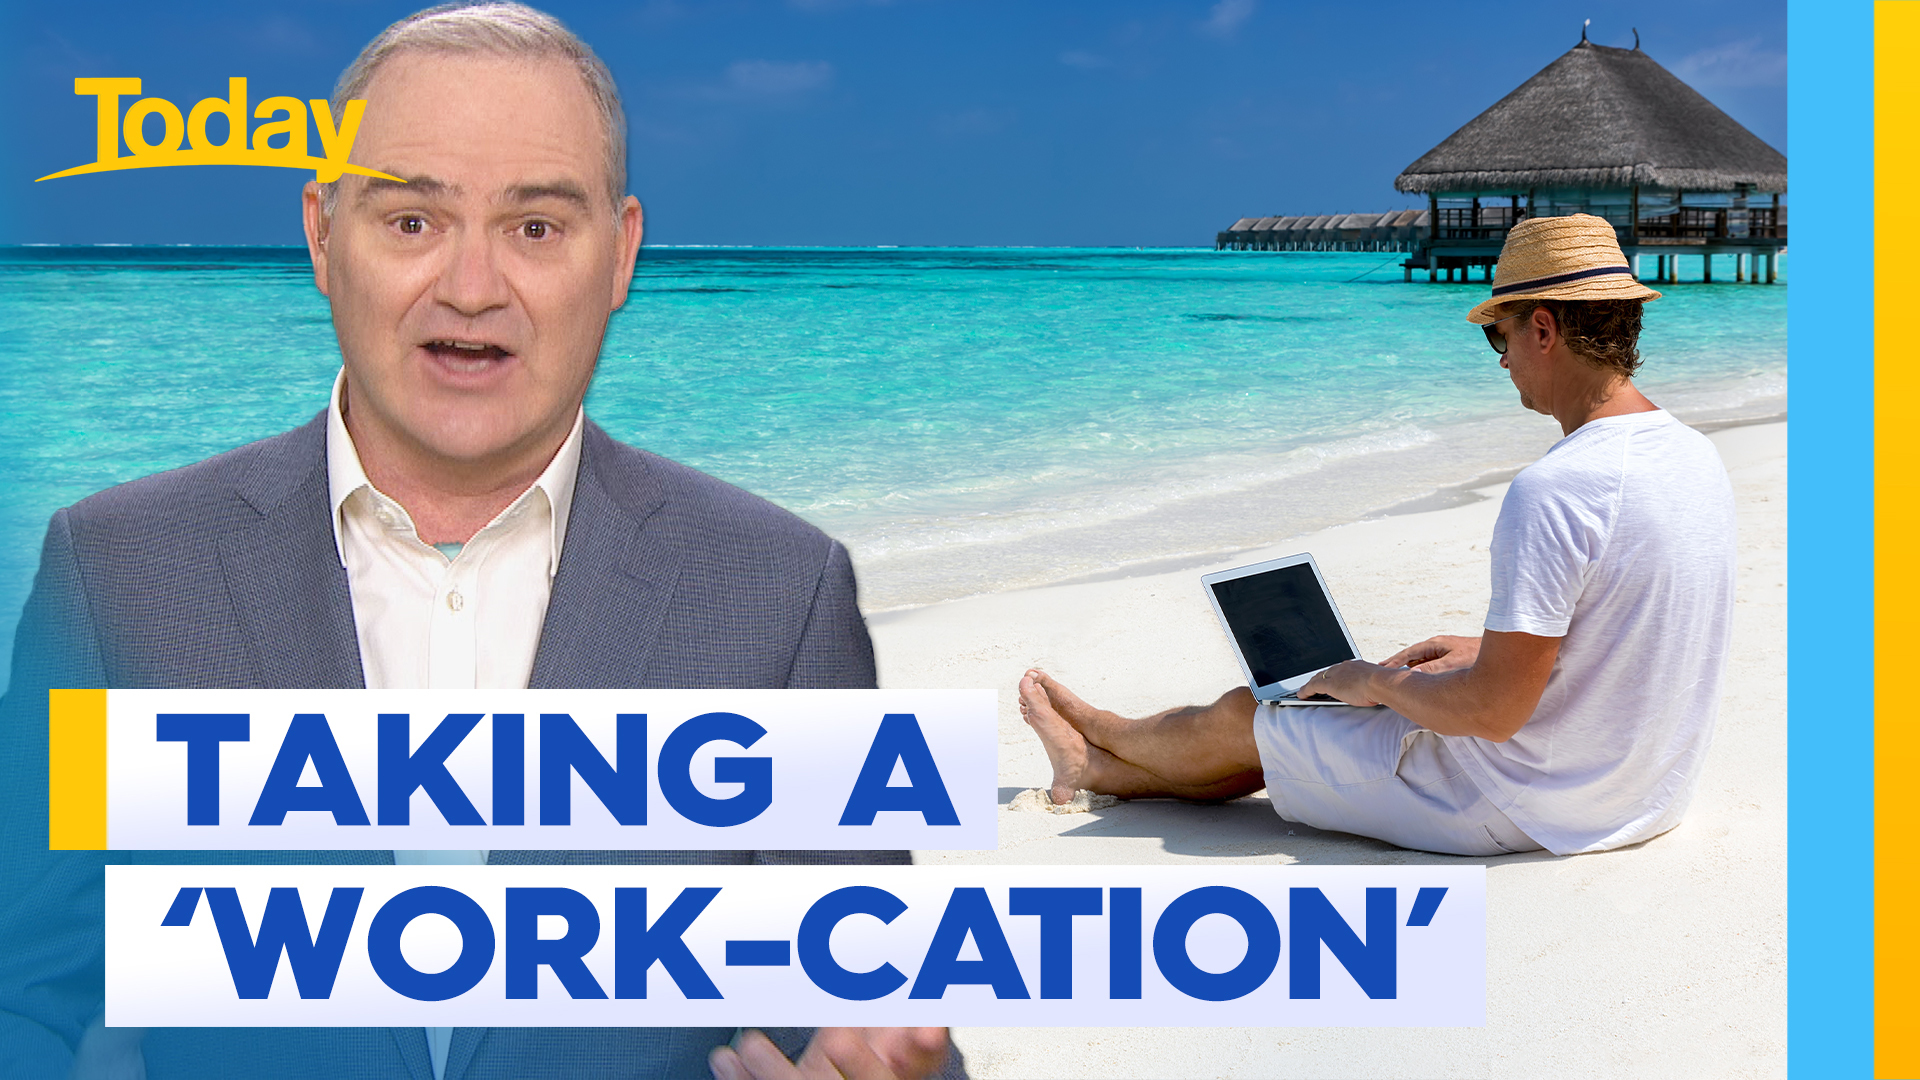 The pros and cons of working while on holidays